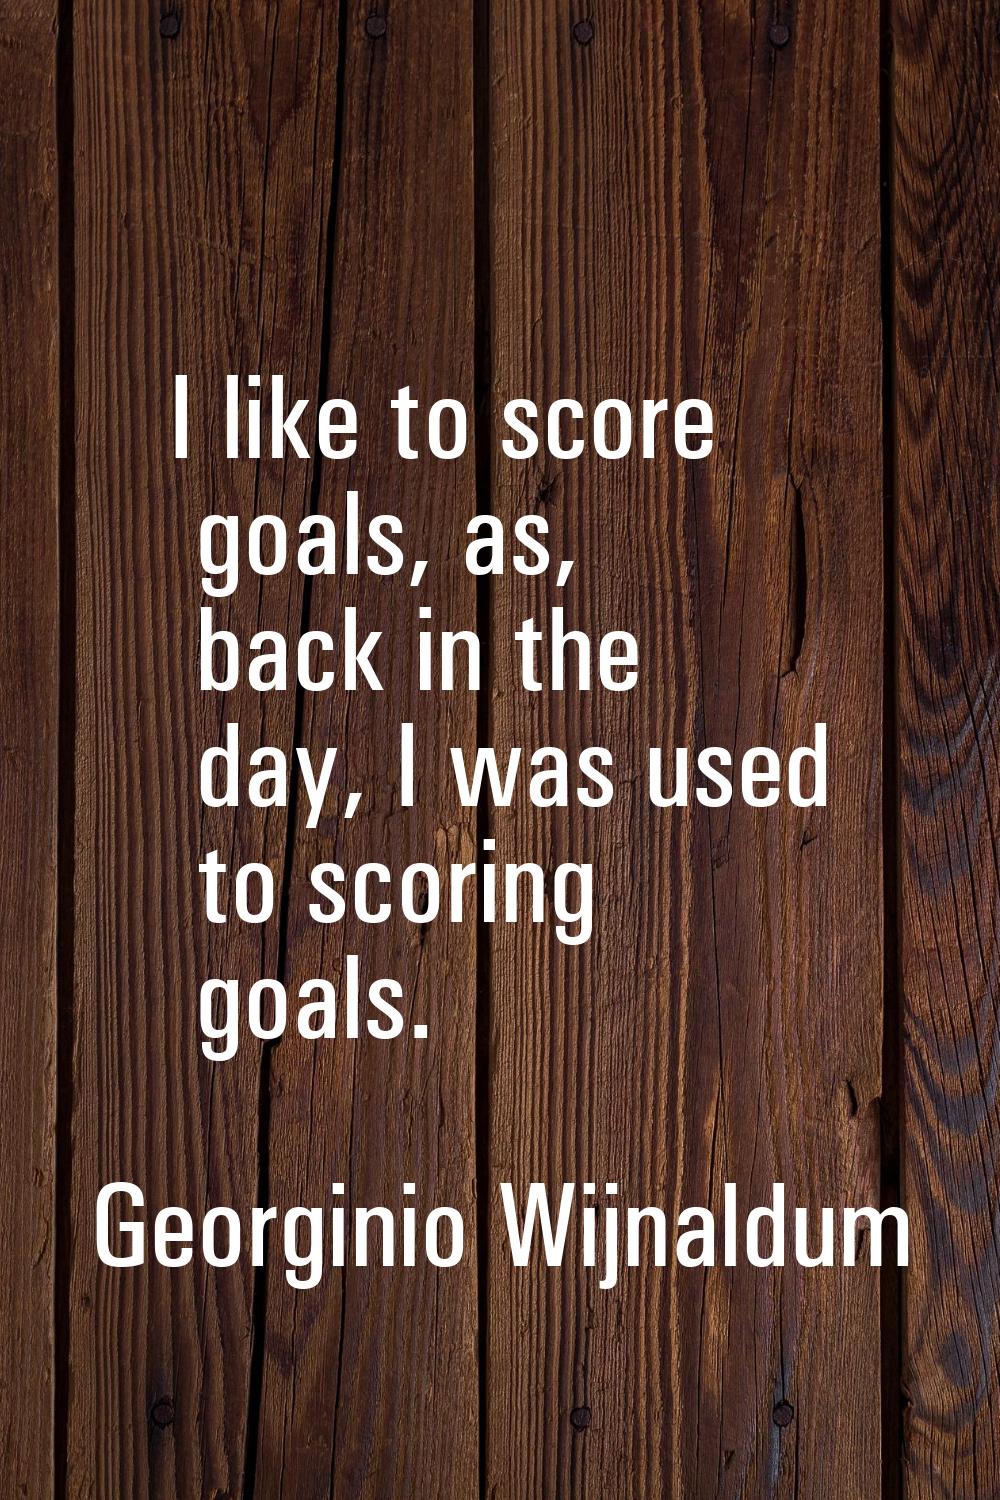 I like to score goals, as, back in the day, I was used to scoring goals.